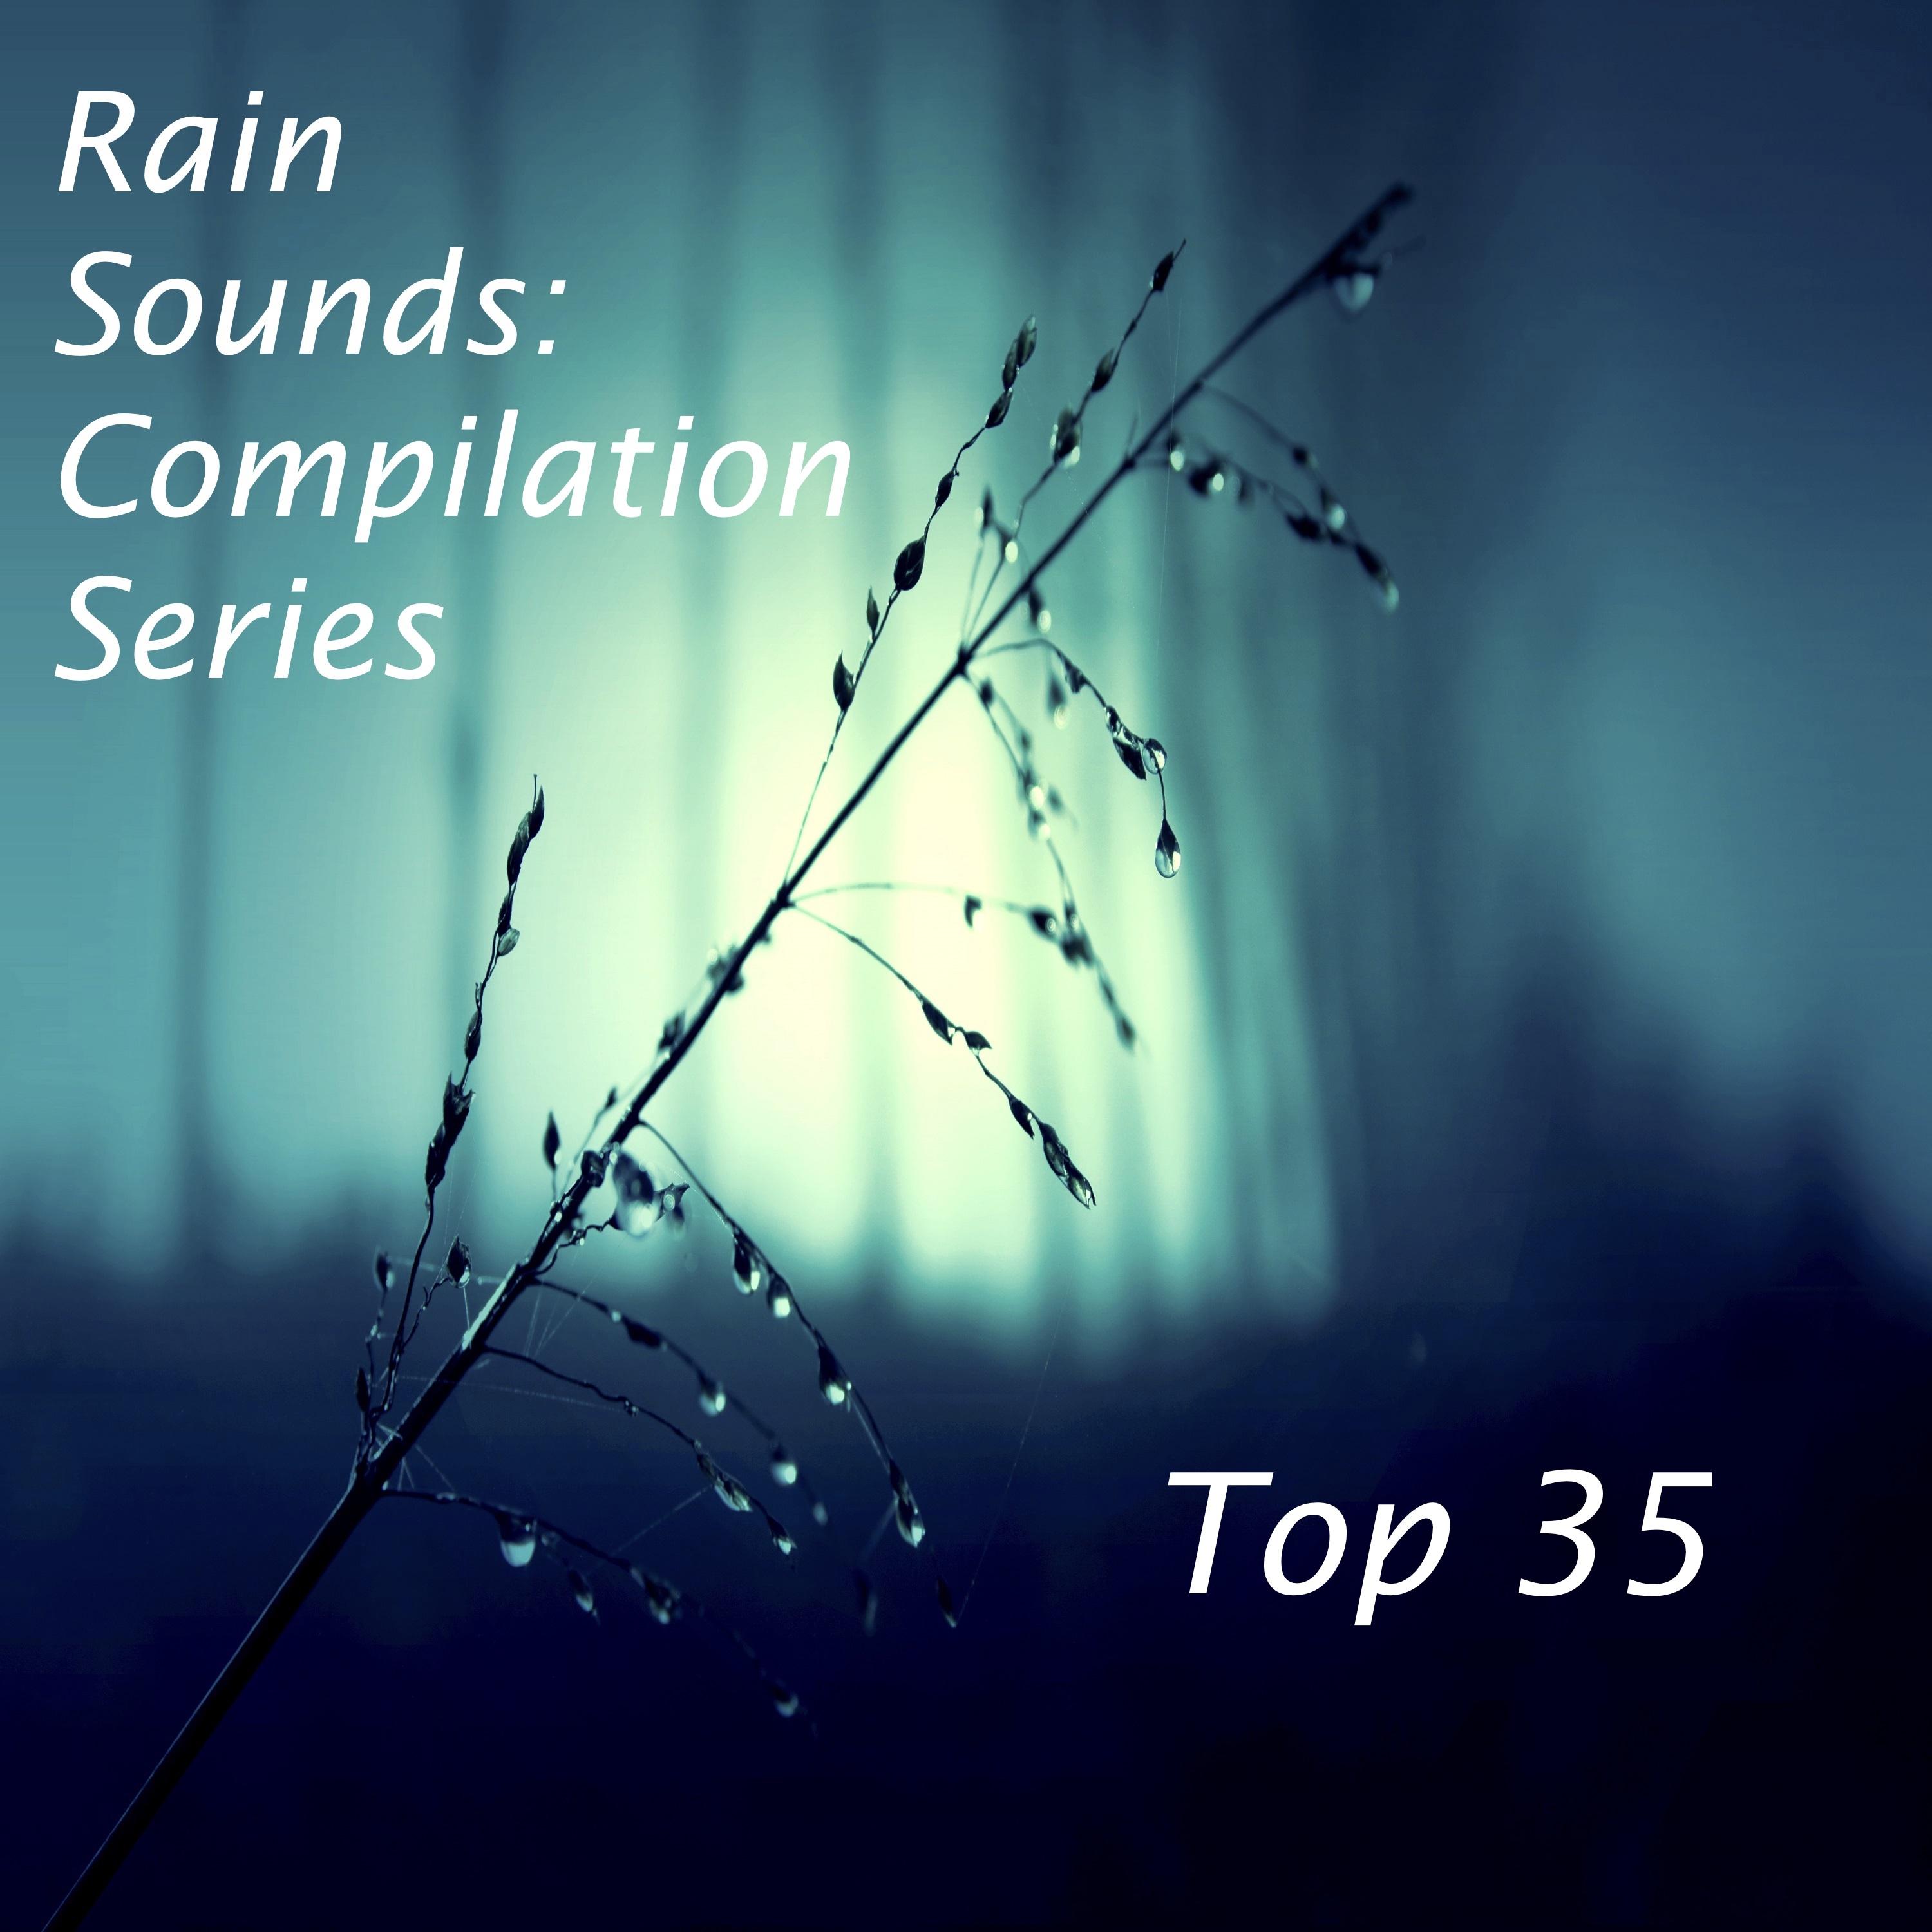 2017 Compilation: Top 35 Loopable Rain Sounds for Deep Sleep, Insomnia, Meditation and Relaxation